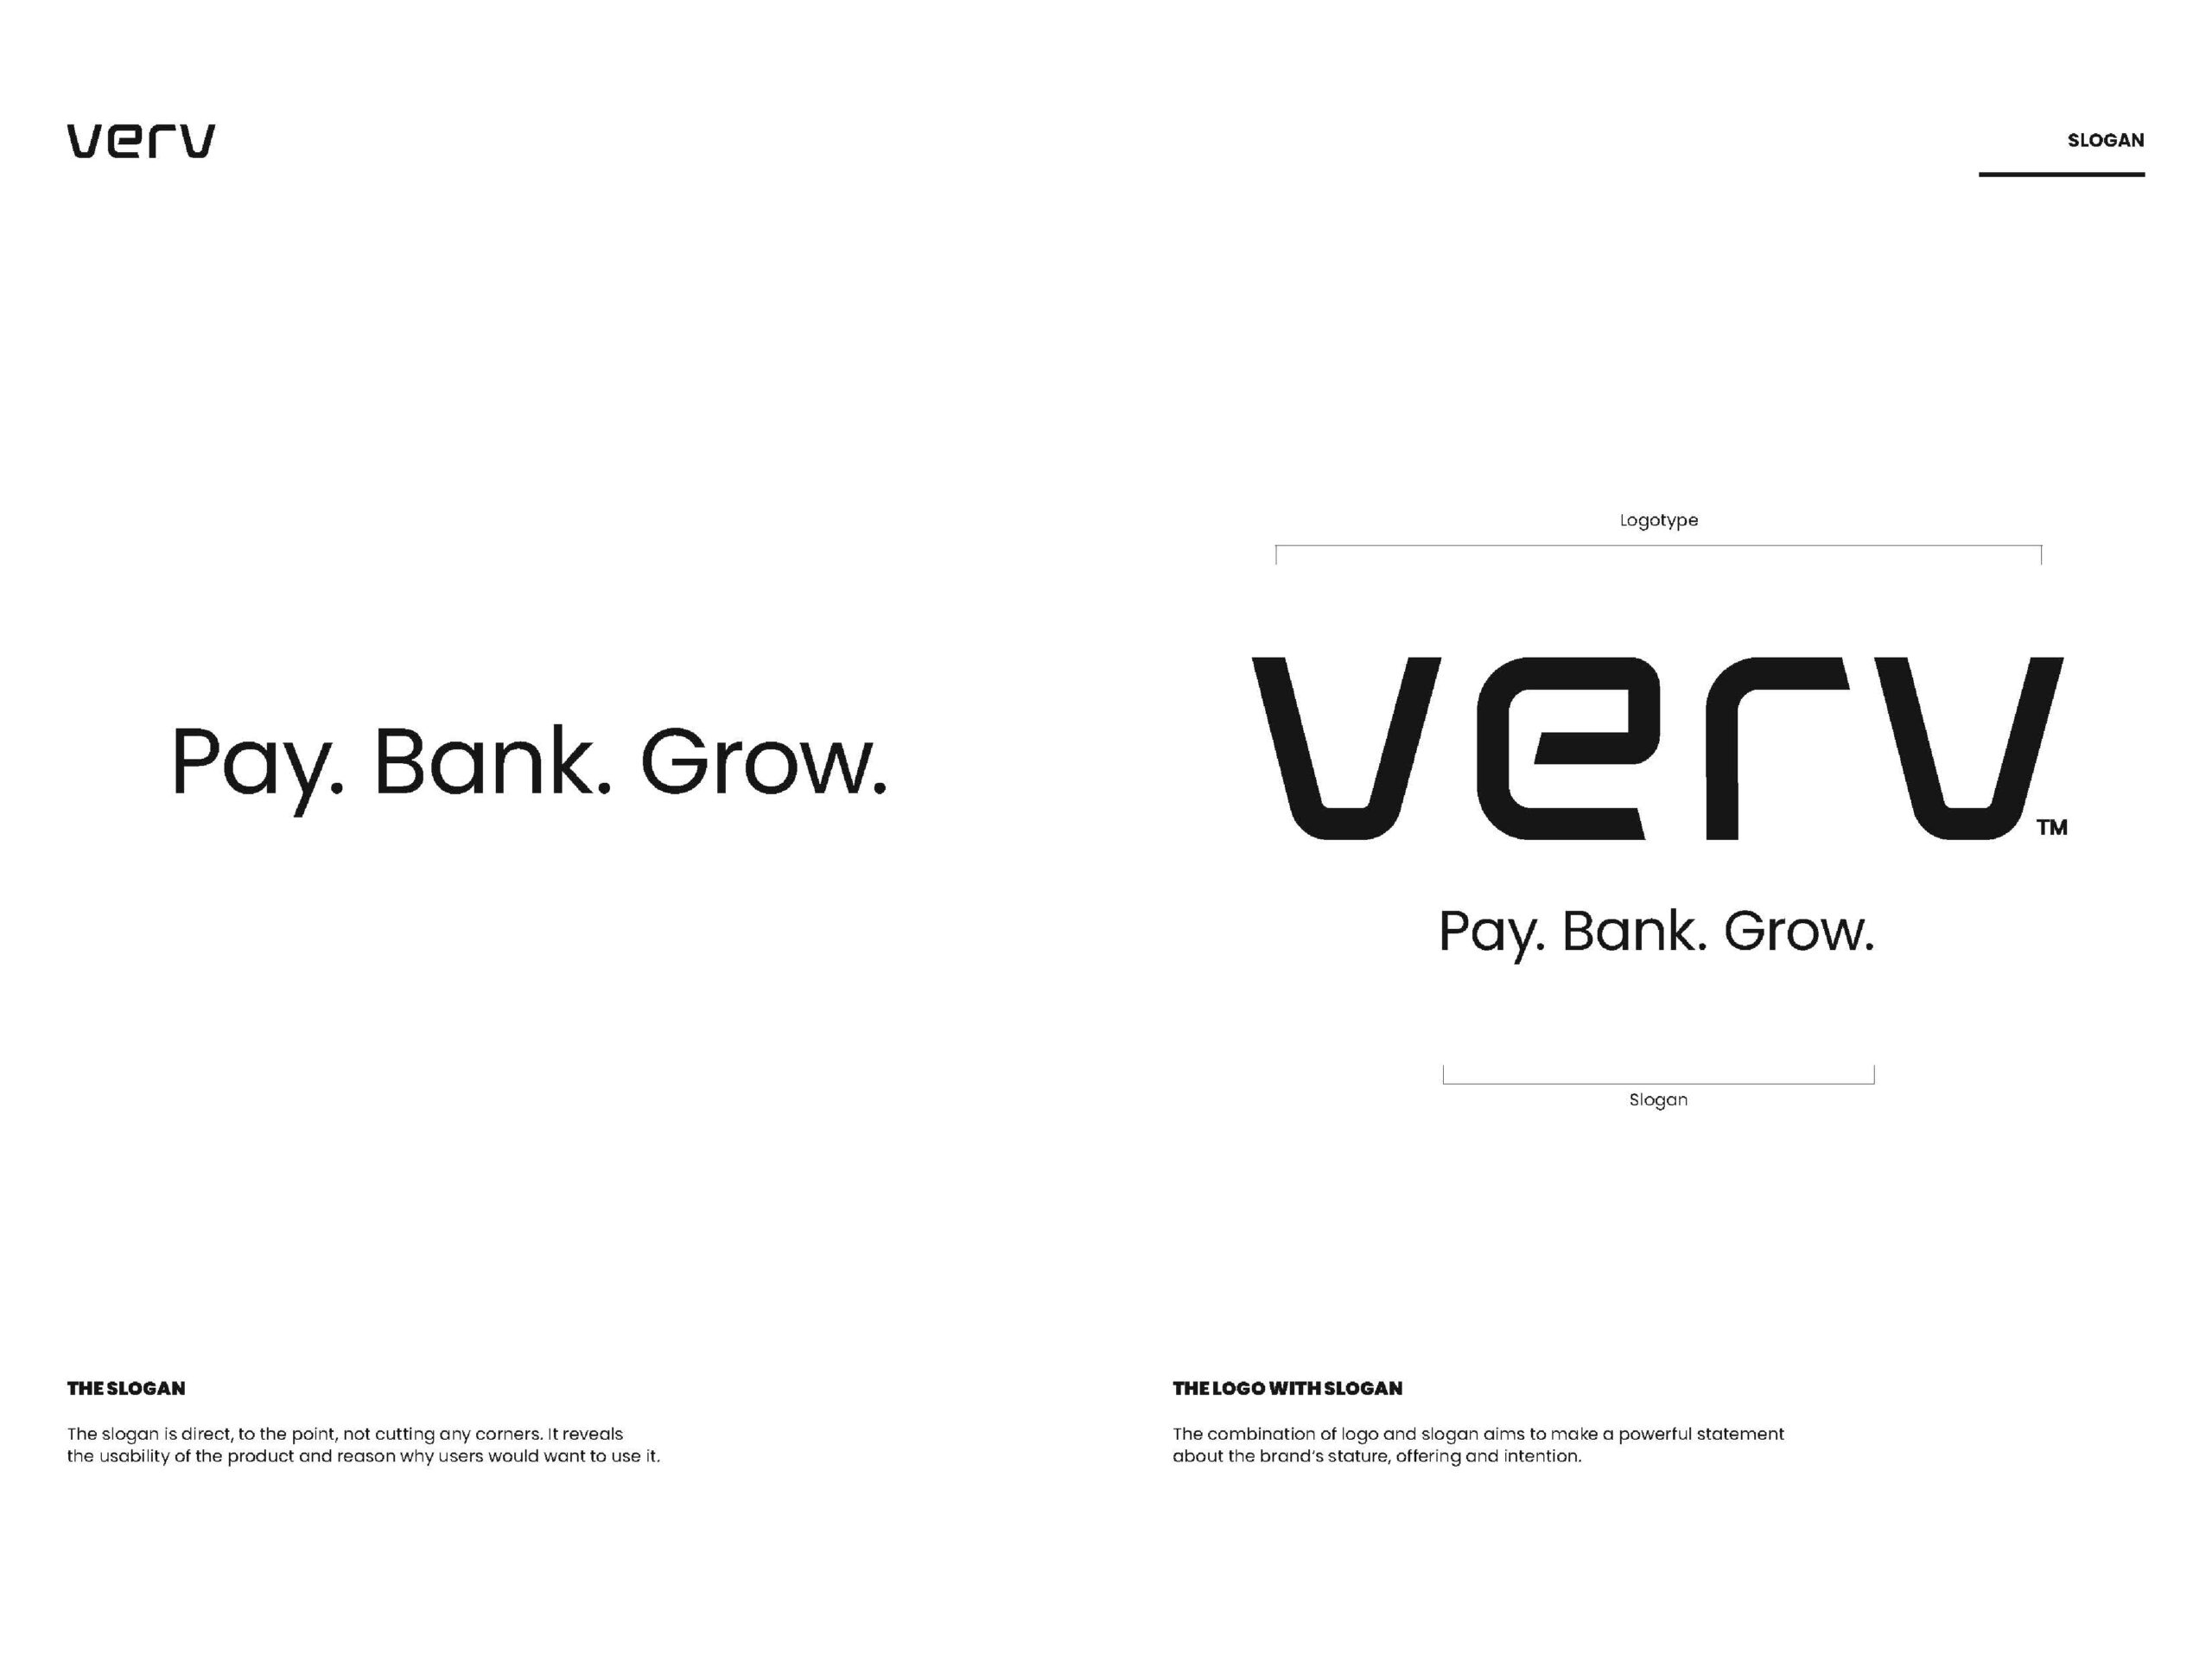 Verv Payments